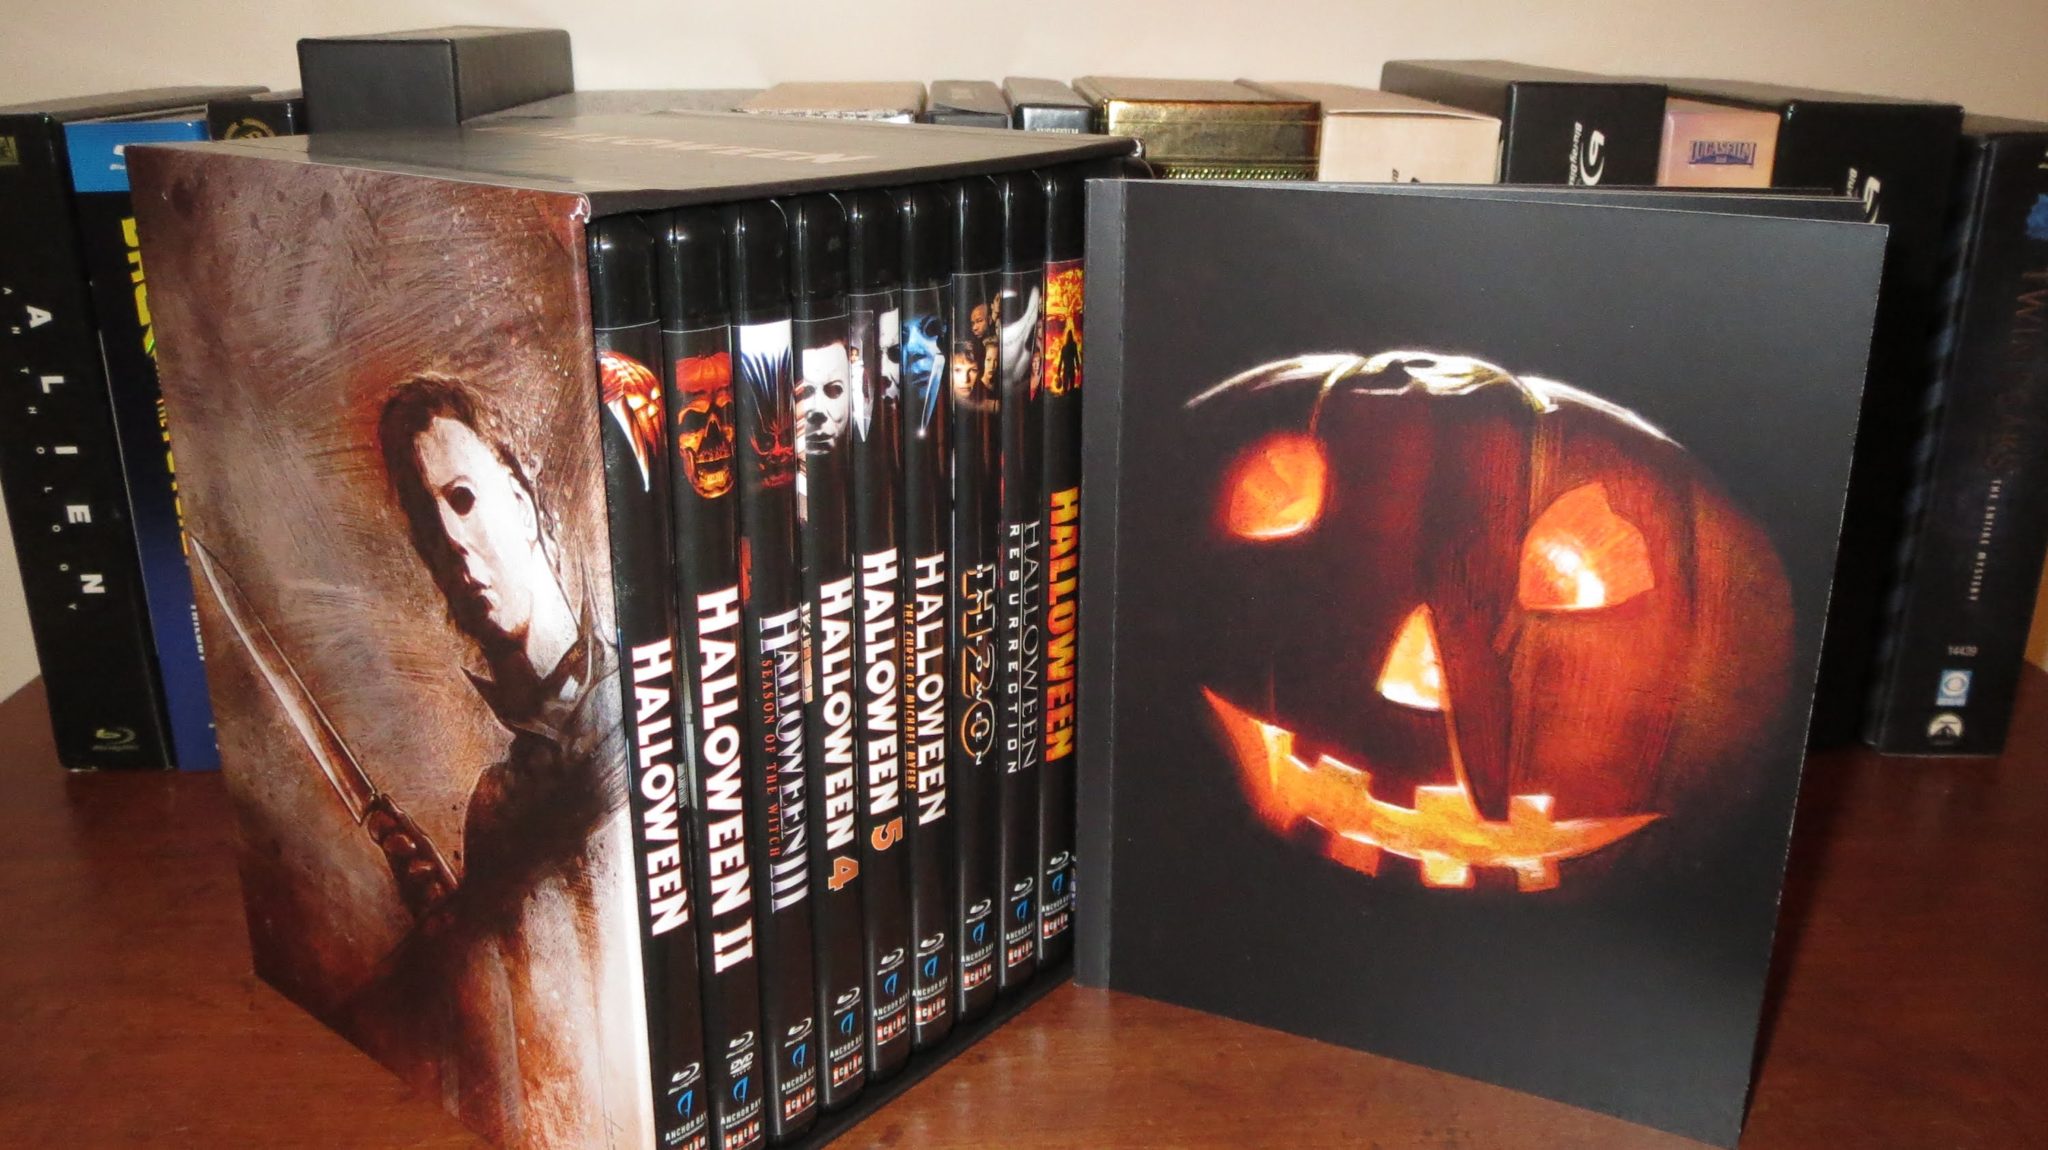 HAlloween complete collection